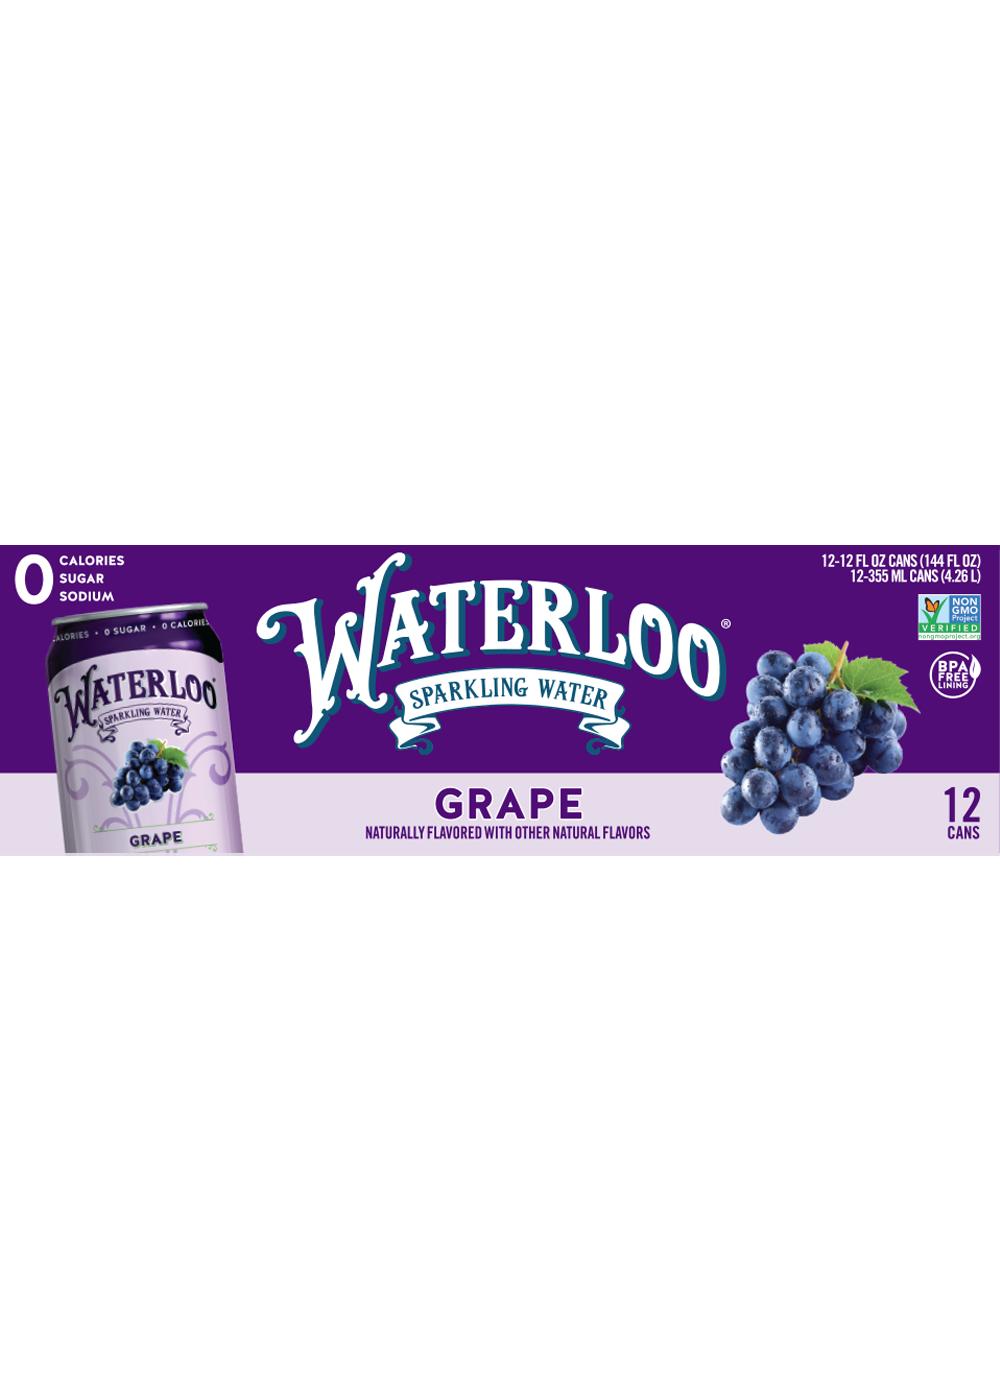 Waterloo Grape Sparkling Water 12 pk Cans; image 1 of 2